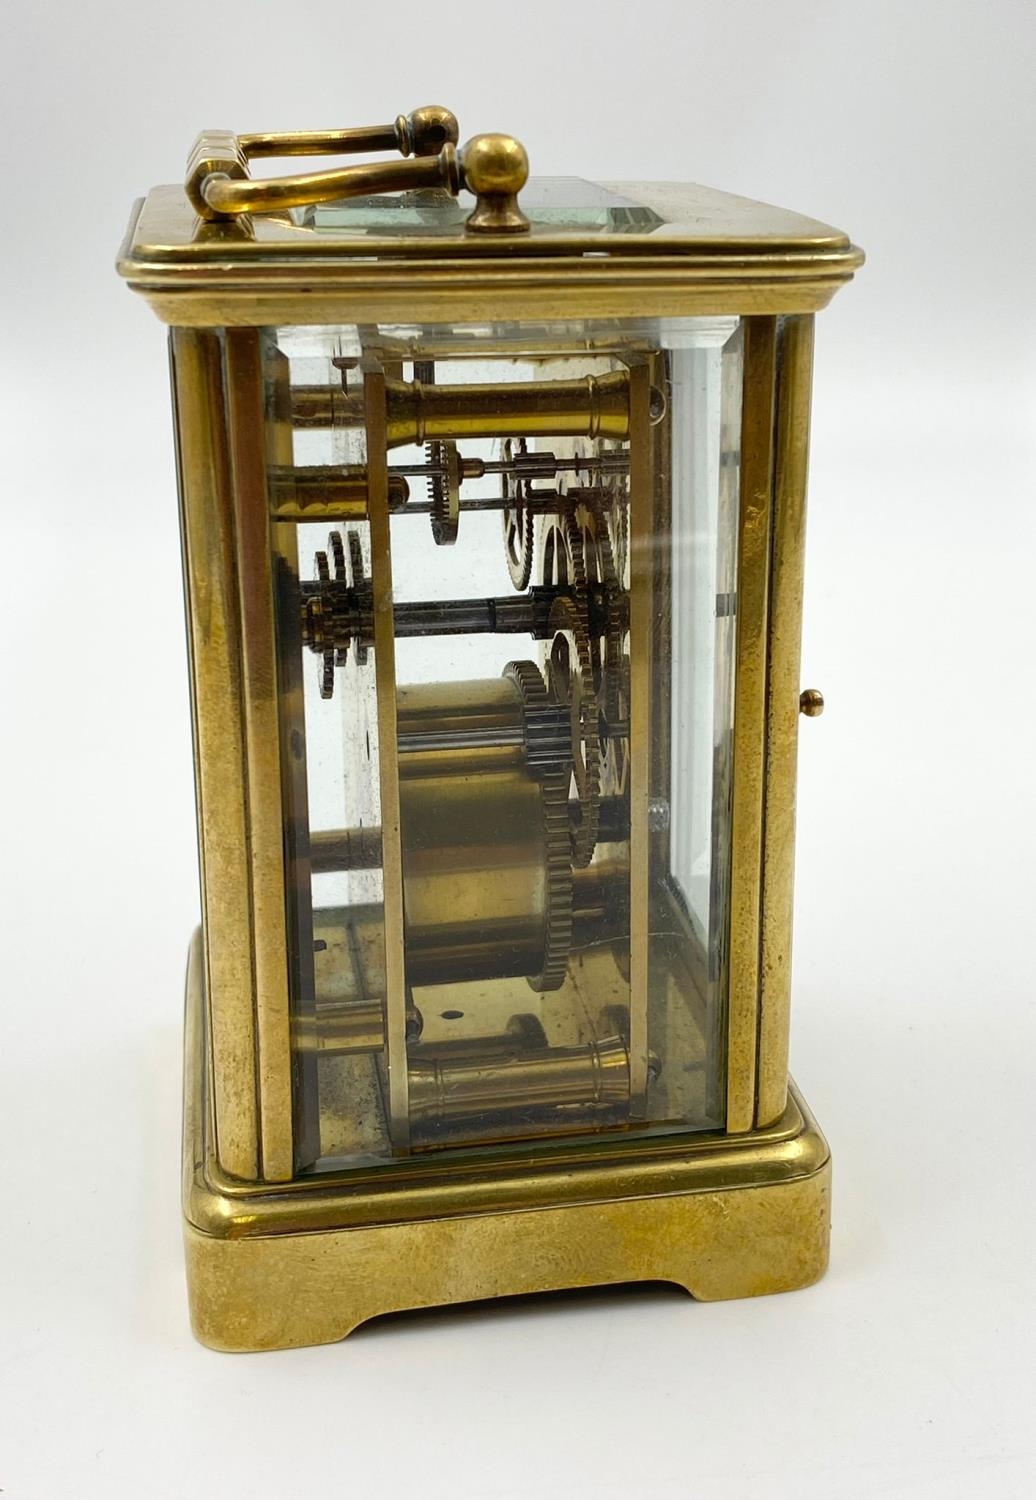 An Antique Brass Carriage Clock. In working order. 11cm tall - Image 4 of 5